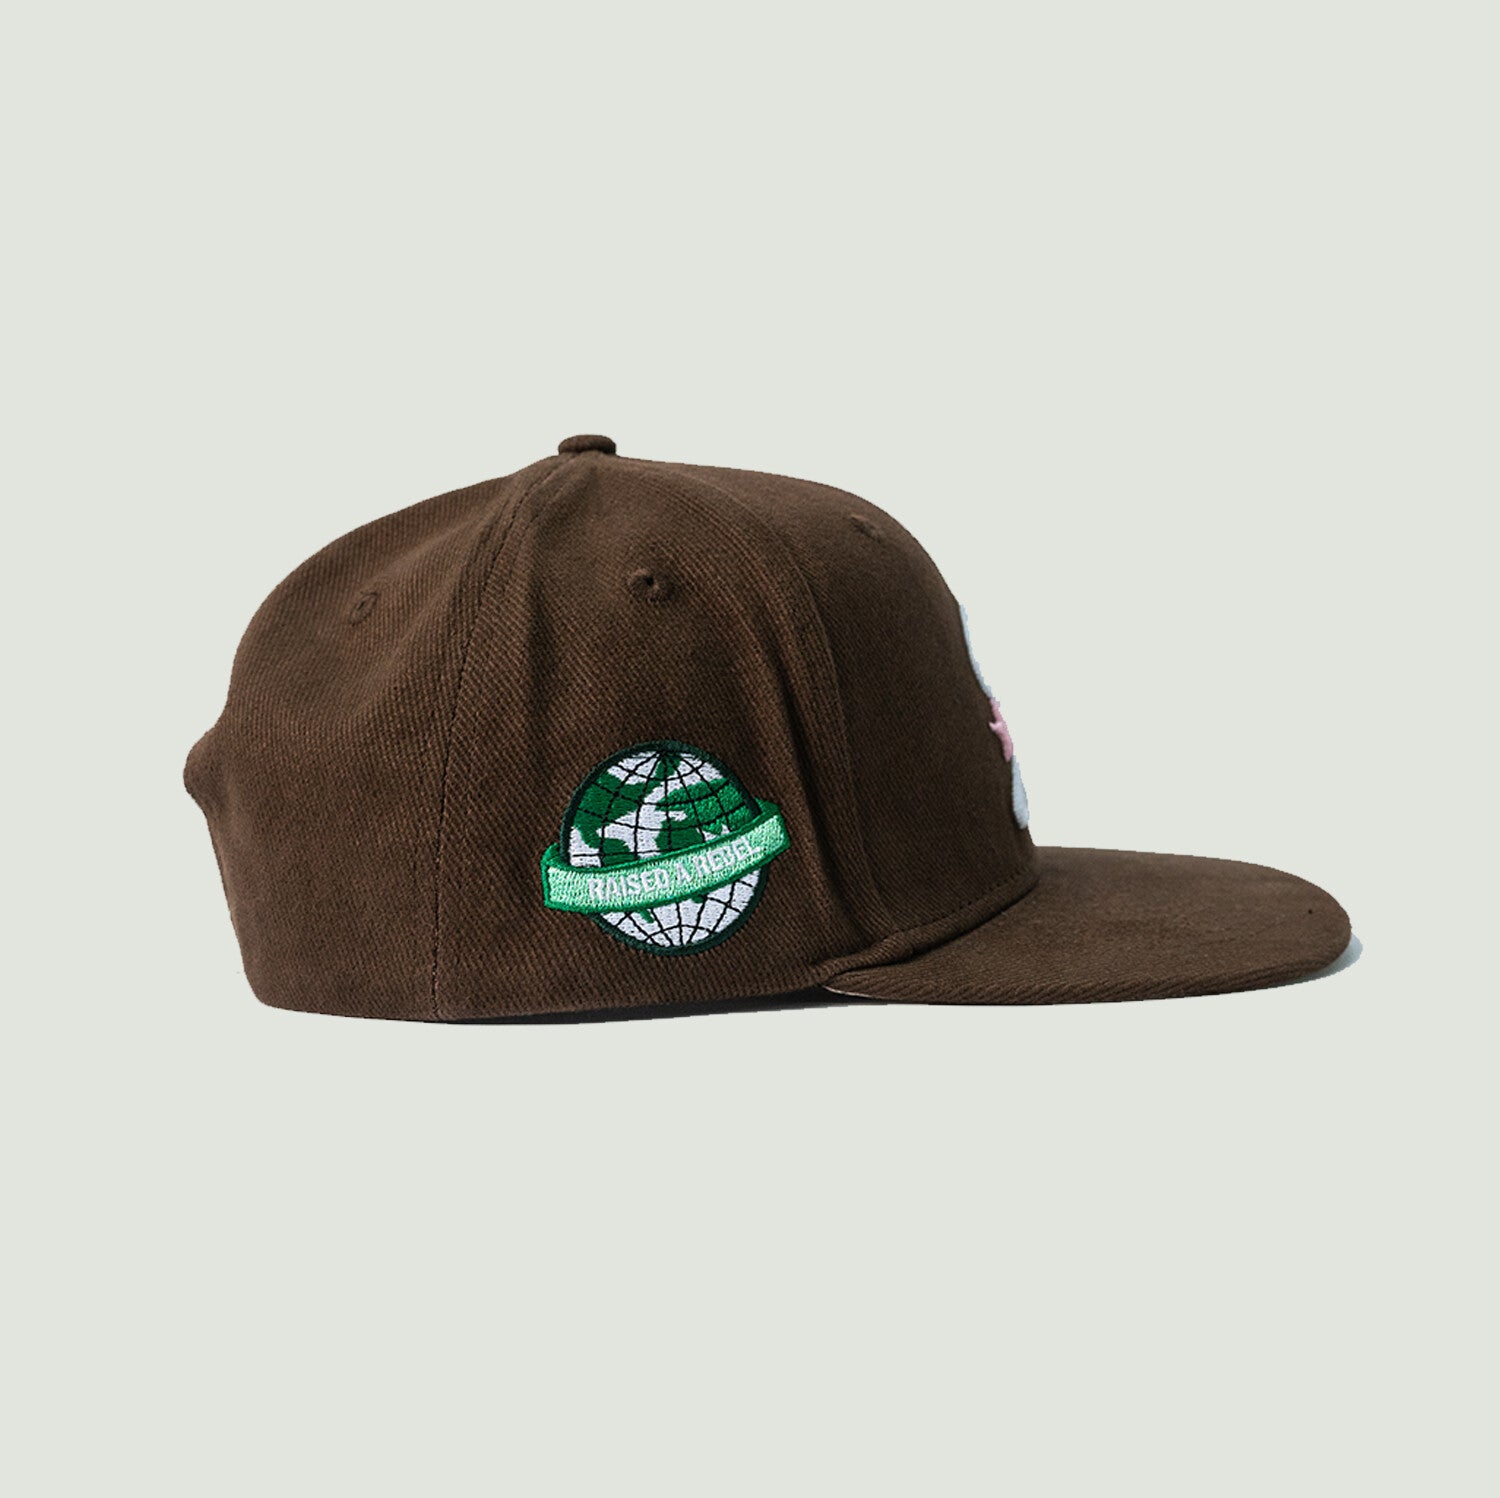 ESSENTIAL S STAR HAT - BROWN (JUNGLE OF AFRICA EDITION)